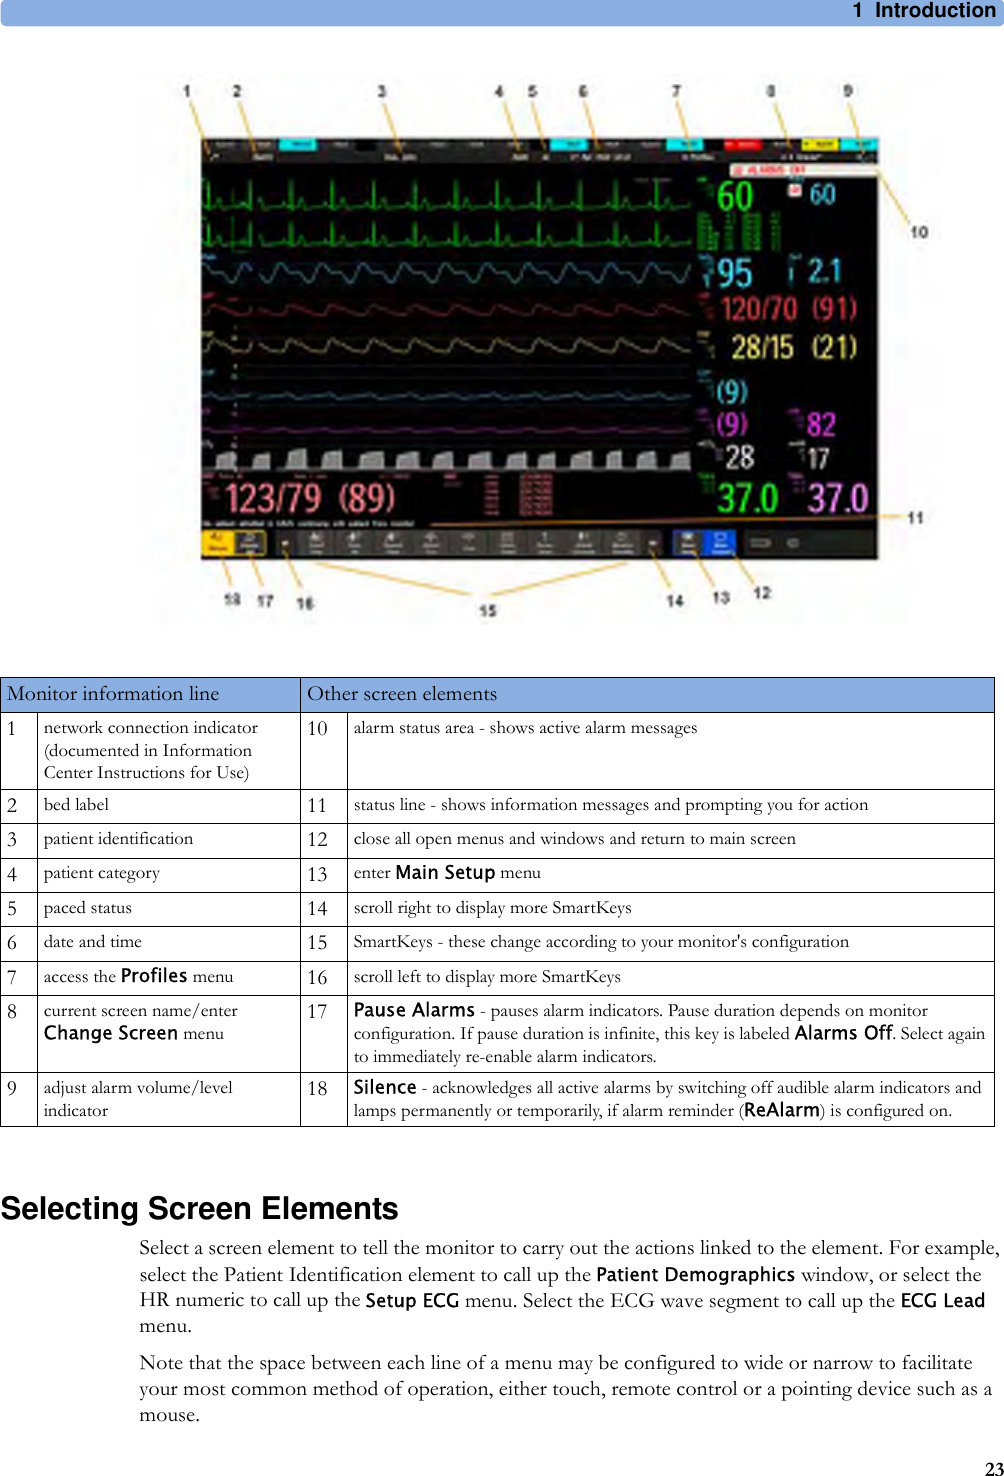 1 Introduction23Selecting Screen ElementsSelect a screen element to tell the monitor to carry out the actions linked to the element. For example, select the Patient Identification element to call up the Patient Demographics window, or select the HR numeric to call up the Setup ECG menu. Select the ECG wave segment to call up the ECG Lead menu.Note that the space between each line of a menu may be configured to wide or narrow to facilitate your most common method of operation, either touch, remote control or a pointing device such as a mouse.Monitor information line Other screen elements1network connection indicator (documented in Information Center Instructions for Use)10 alarm status area - shows active alarm messages2bed label 11 status line - shows information messages and prompting you for action3patient identification 12 close all open menus and windows and return to main screen4patient category 13 enter Main Setup menu5paced status 14 scroll right to display more SmartKeys6date and time 15 SmartKeys - these change according to your monitor&apos;s configuration7access the Profiles menu 16 scroll left to display more SmartKeys8current screen name/enter Change Screen menu 17 Pause Alarms - pauses alarm indicators. Pause duration depends on monitor configuration. If pause duration is infinite, this key is labeled Alarms Off. Select again to immediately re-enable alarm indicators.9adjust alarm volume/level indicator 18 Silence - acknowledges all active alarms by switching off audible alarm indicators and lamps permanently or temporarily, if alarm reminder (ReAlarm) is configured on.